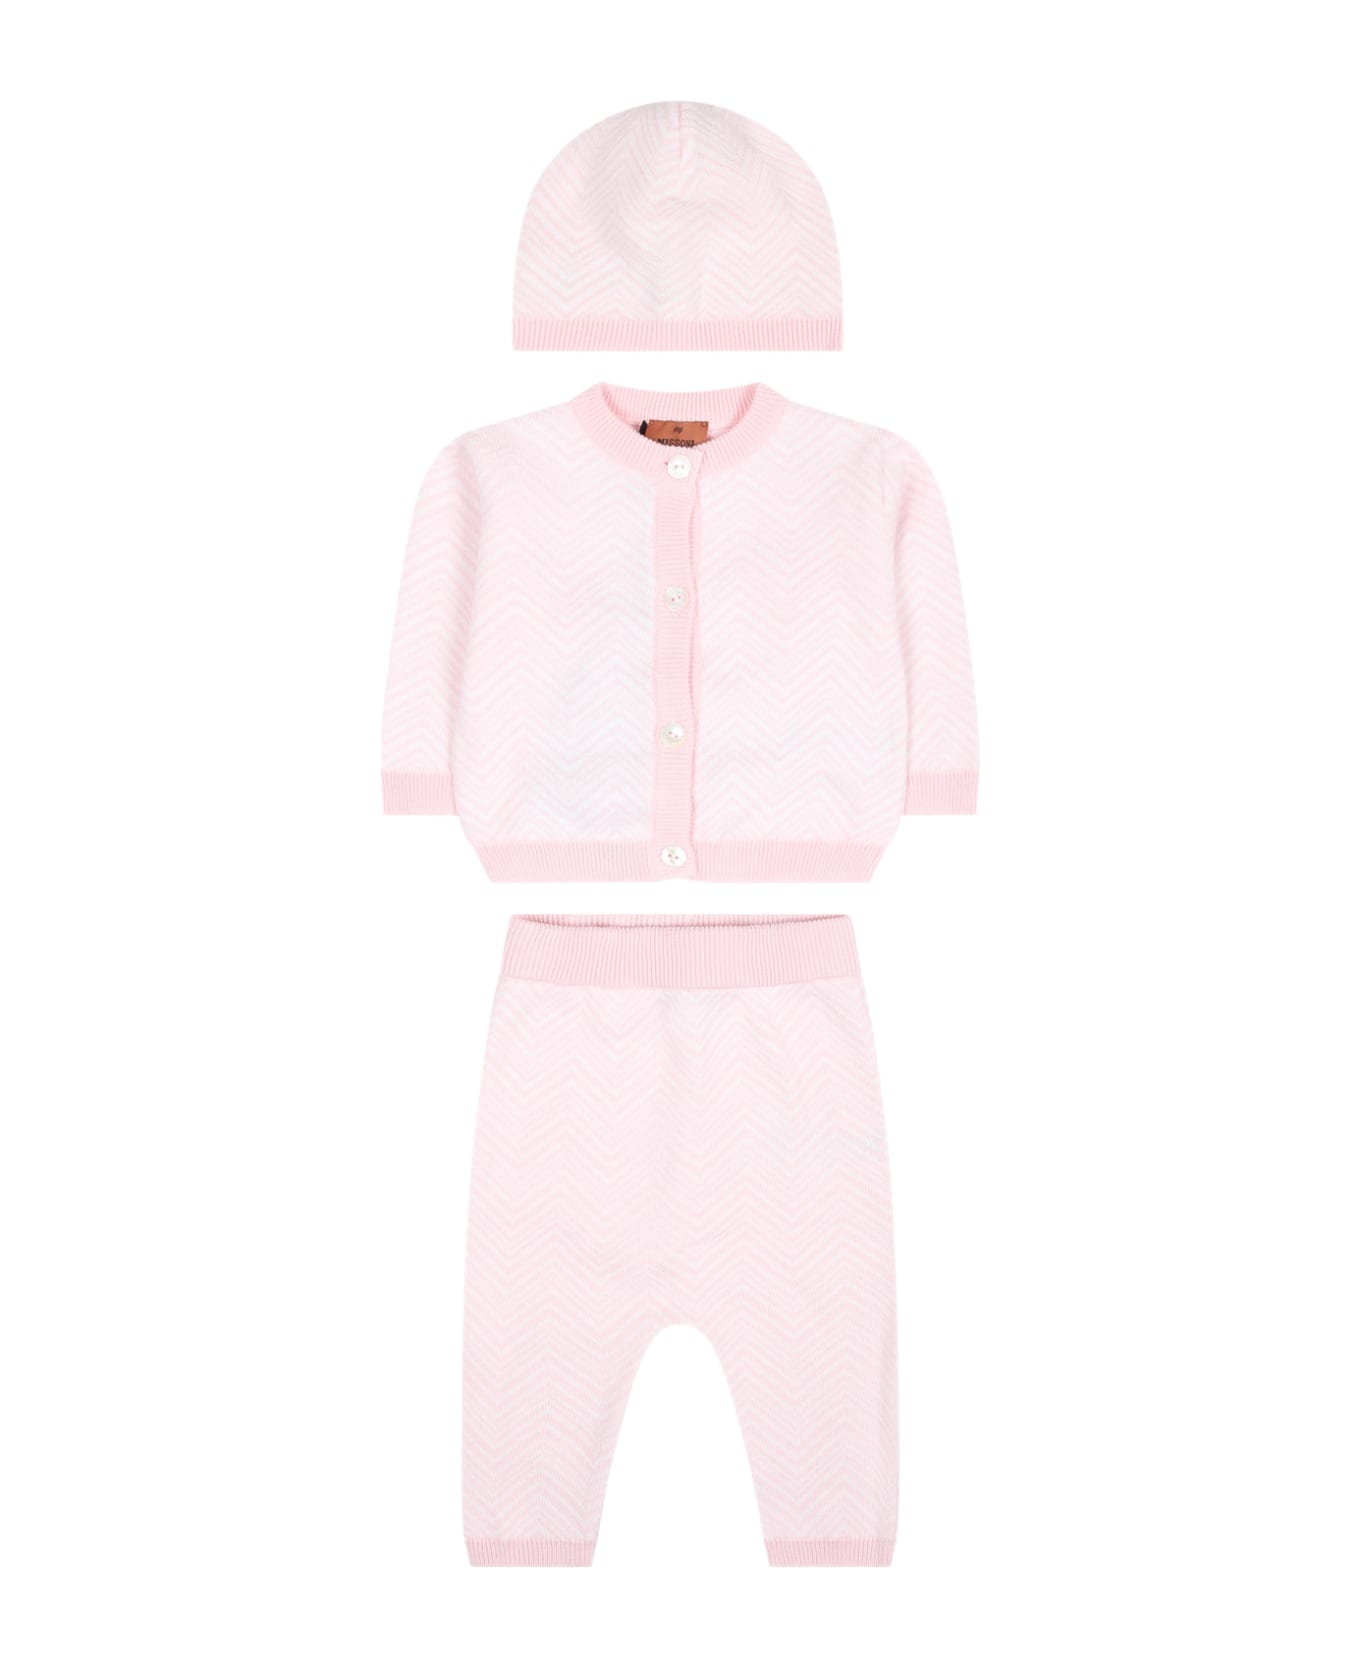 Missoni Pink Birth Suit For Baby Girl With Chevron Pattern - Pink